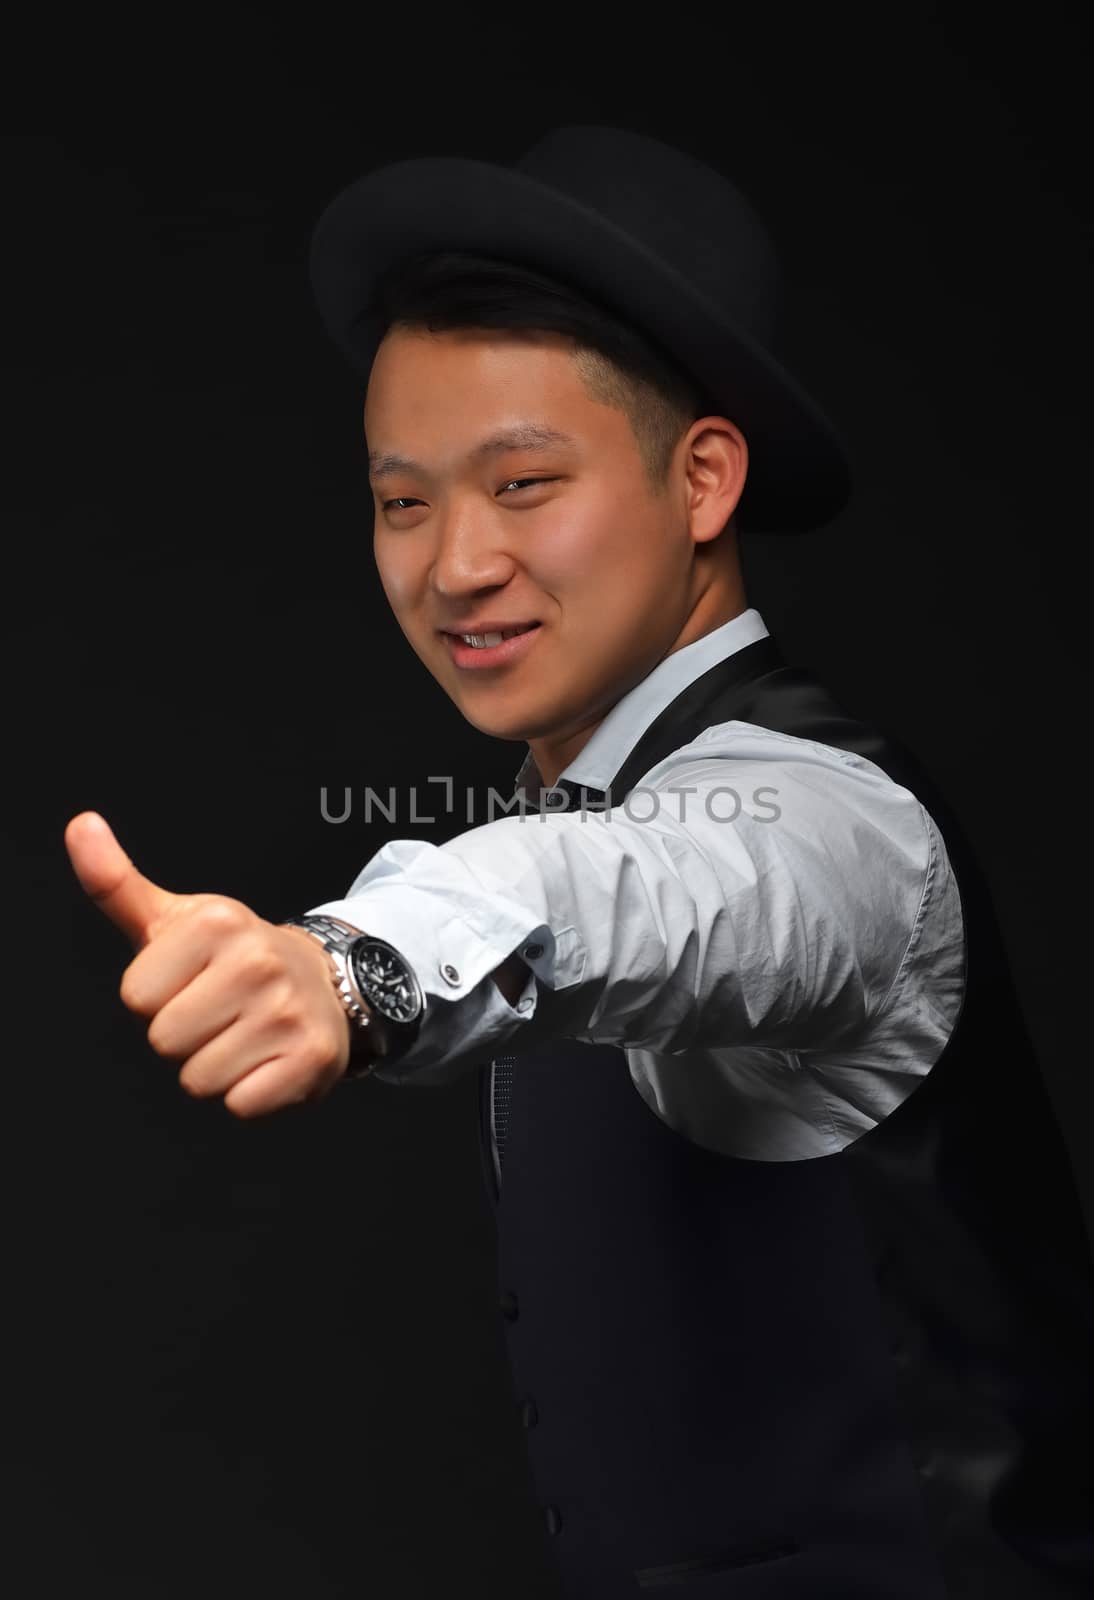 Young Asian man in shirt and jacket shows gesture "super" on camera